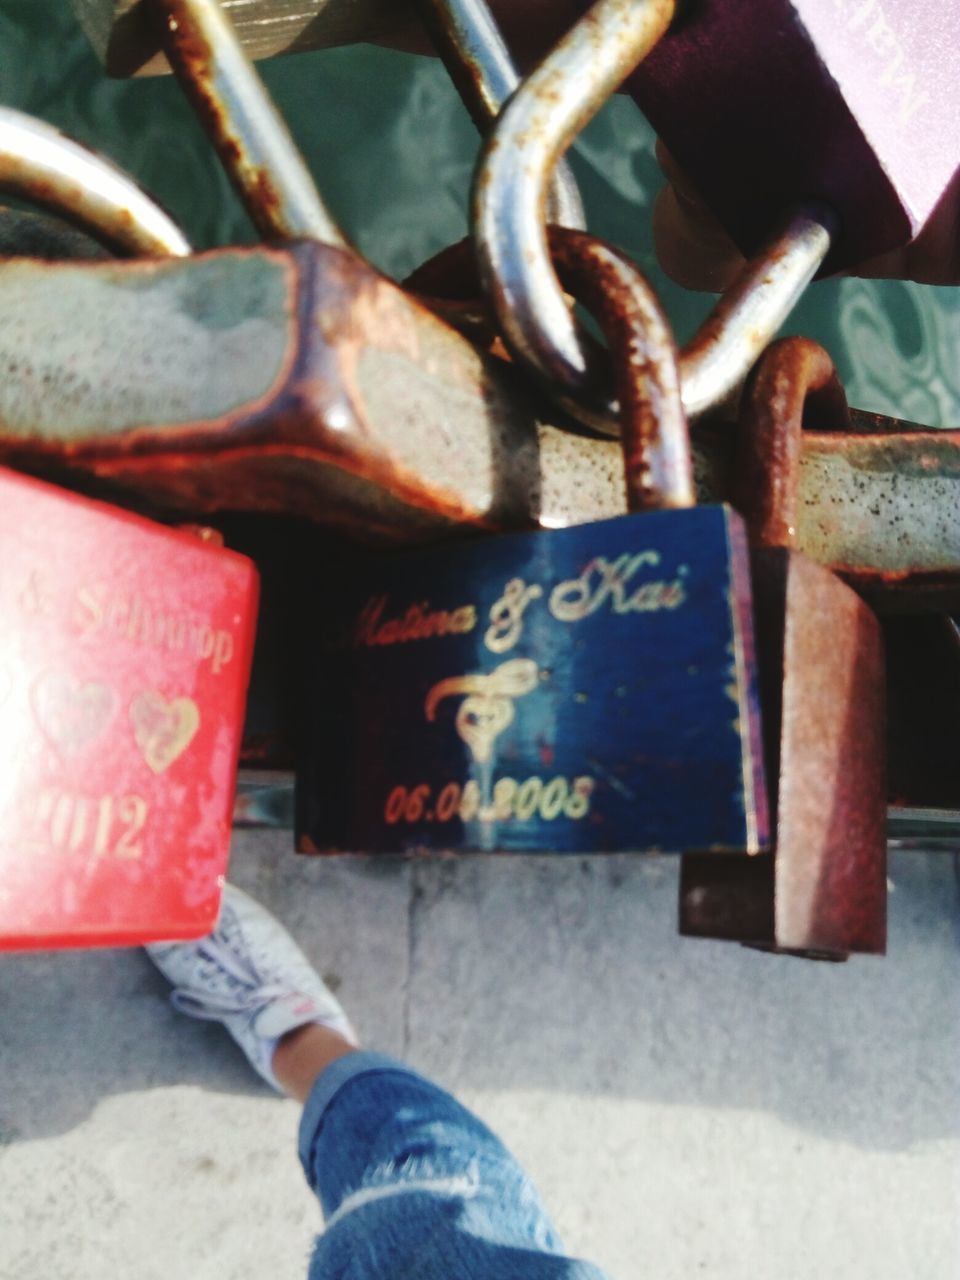 metal, padlock, lock, outdoors, text, day, close-up, one person, love lock, human body part, low section, human hand